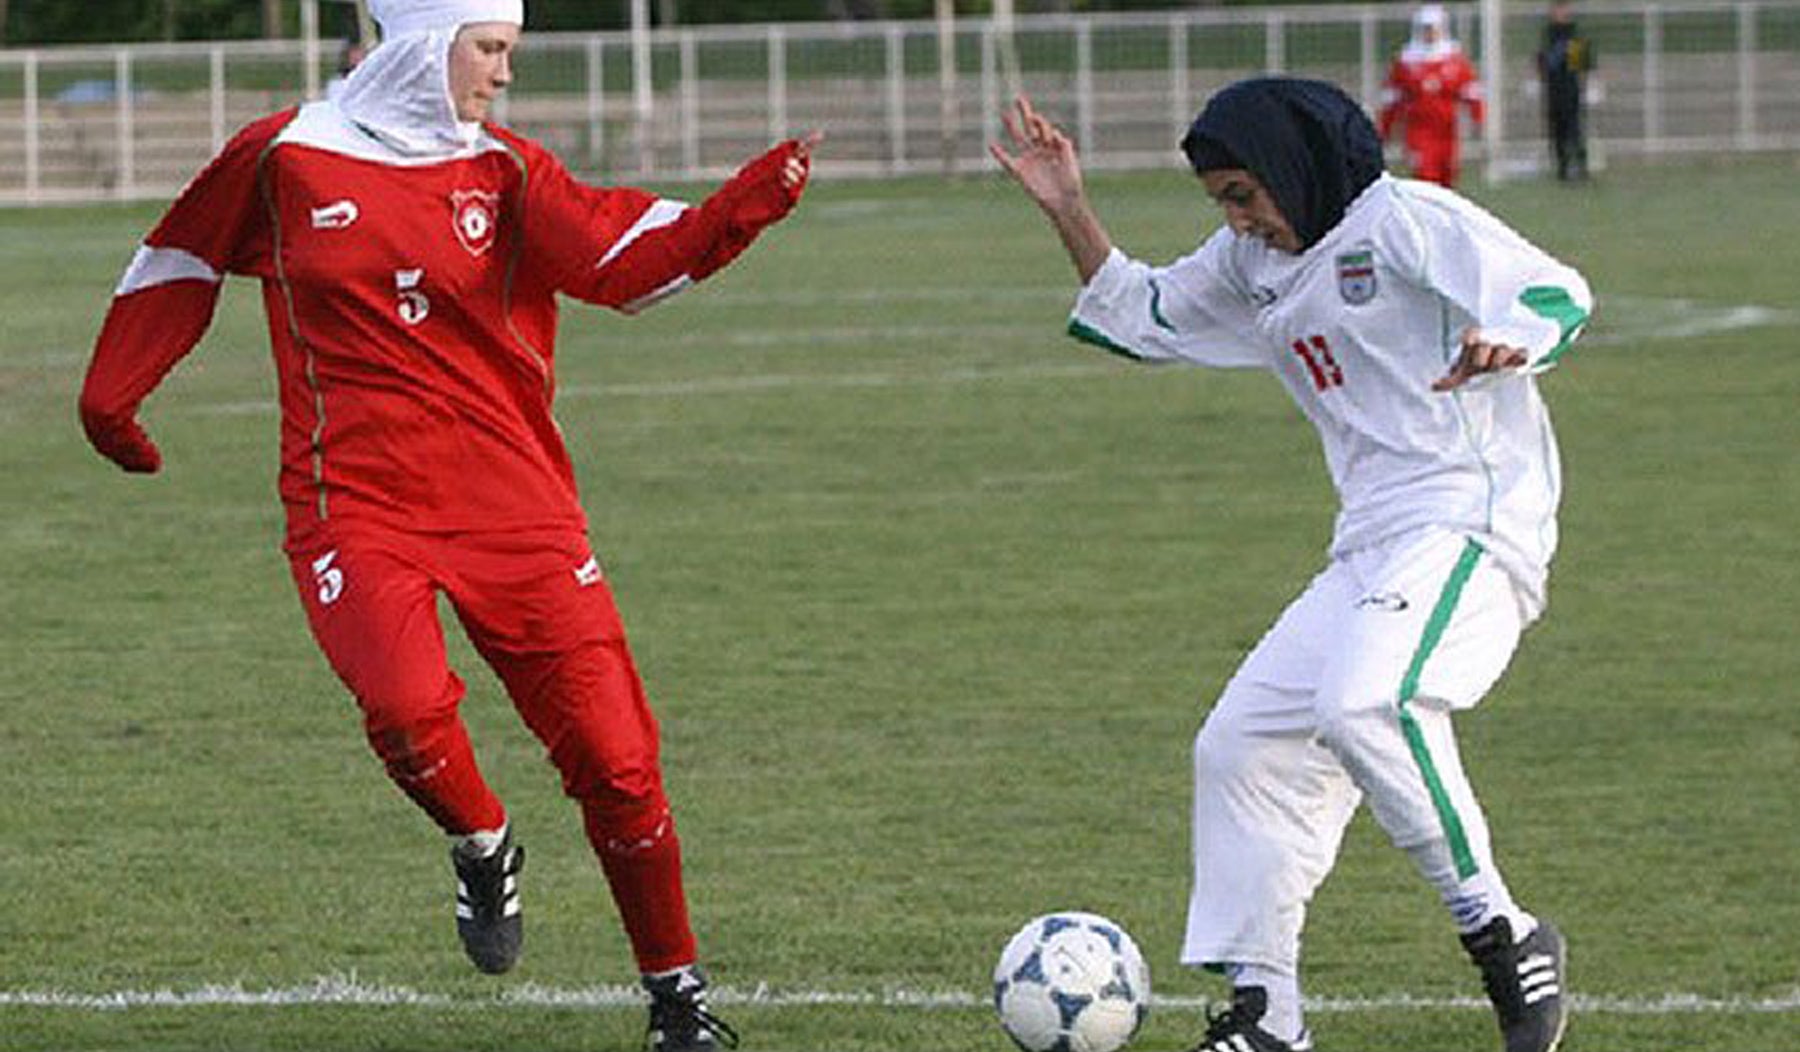 Hijab falls off woman soccer player but opposition comes to her aid